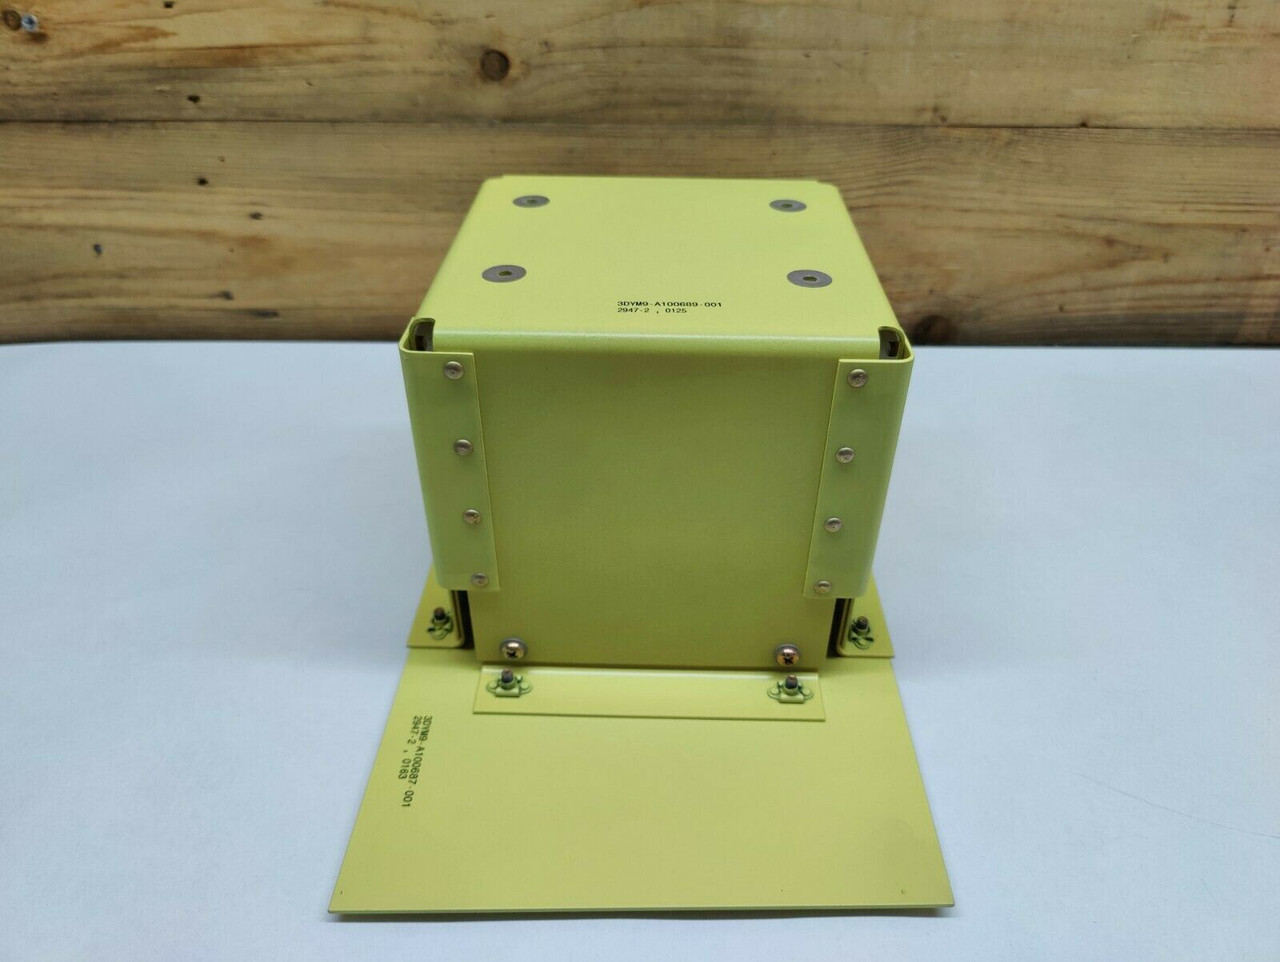 Sequencer Mount Assembly Installation A100685-100, Yellow